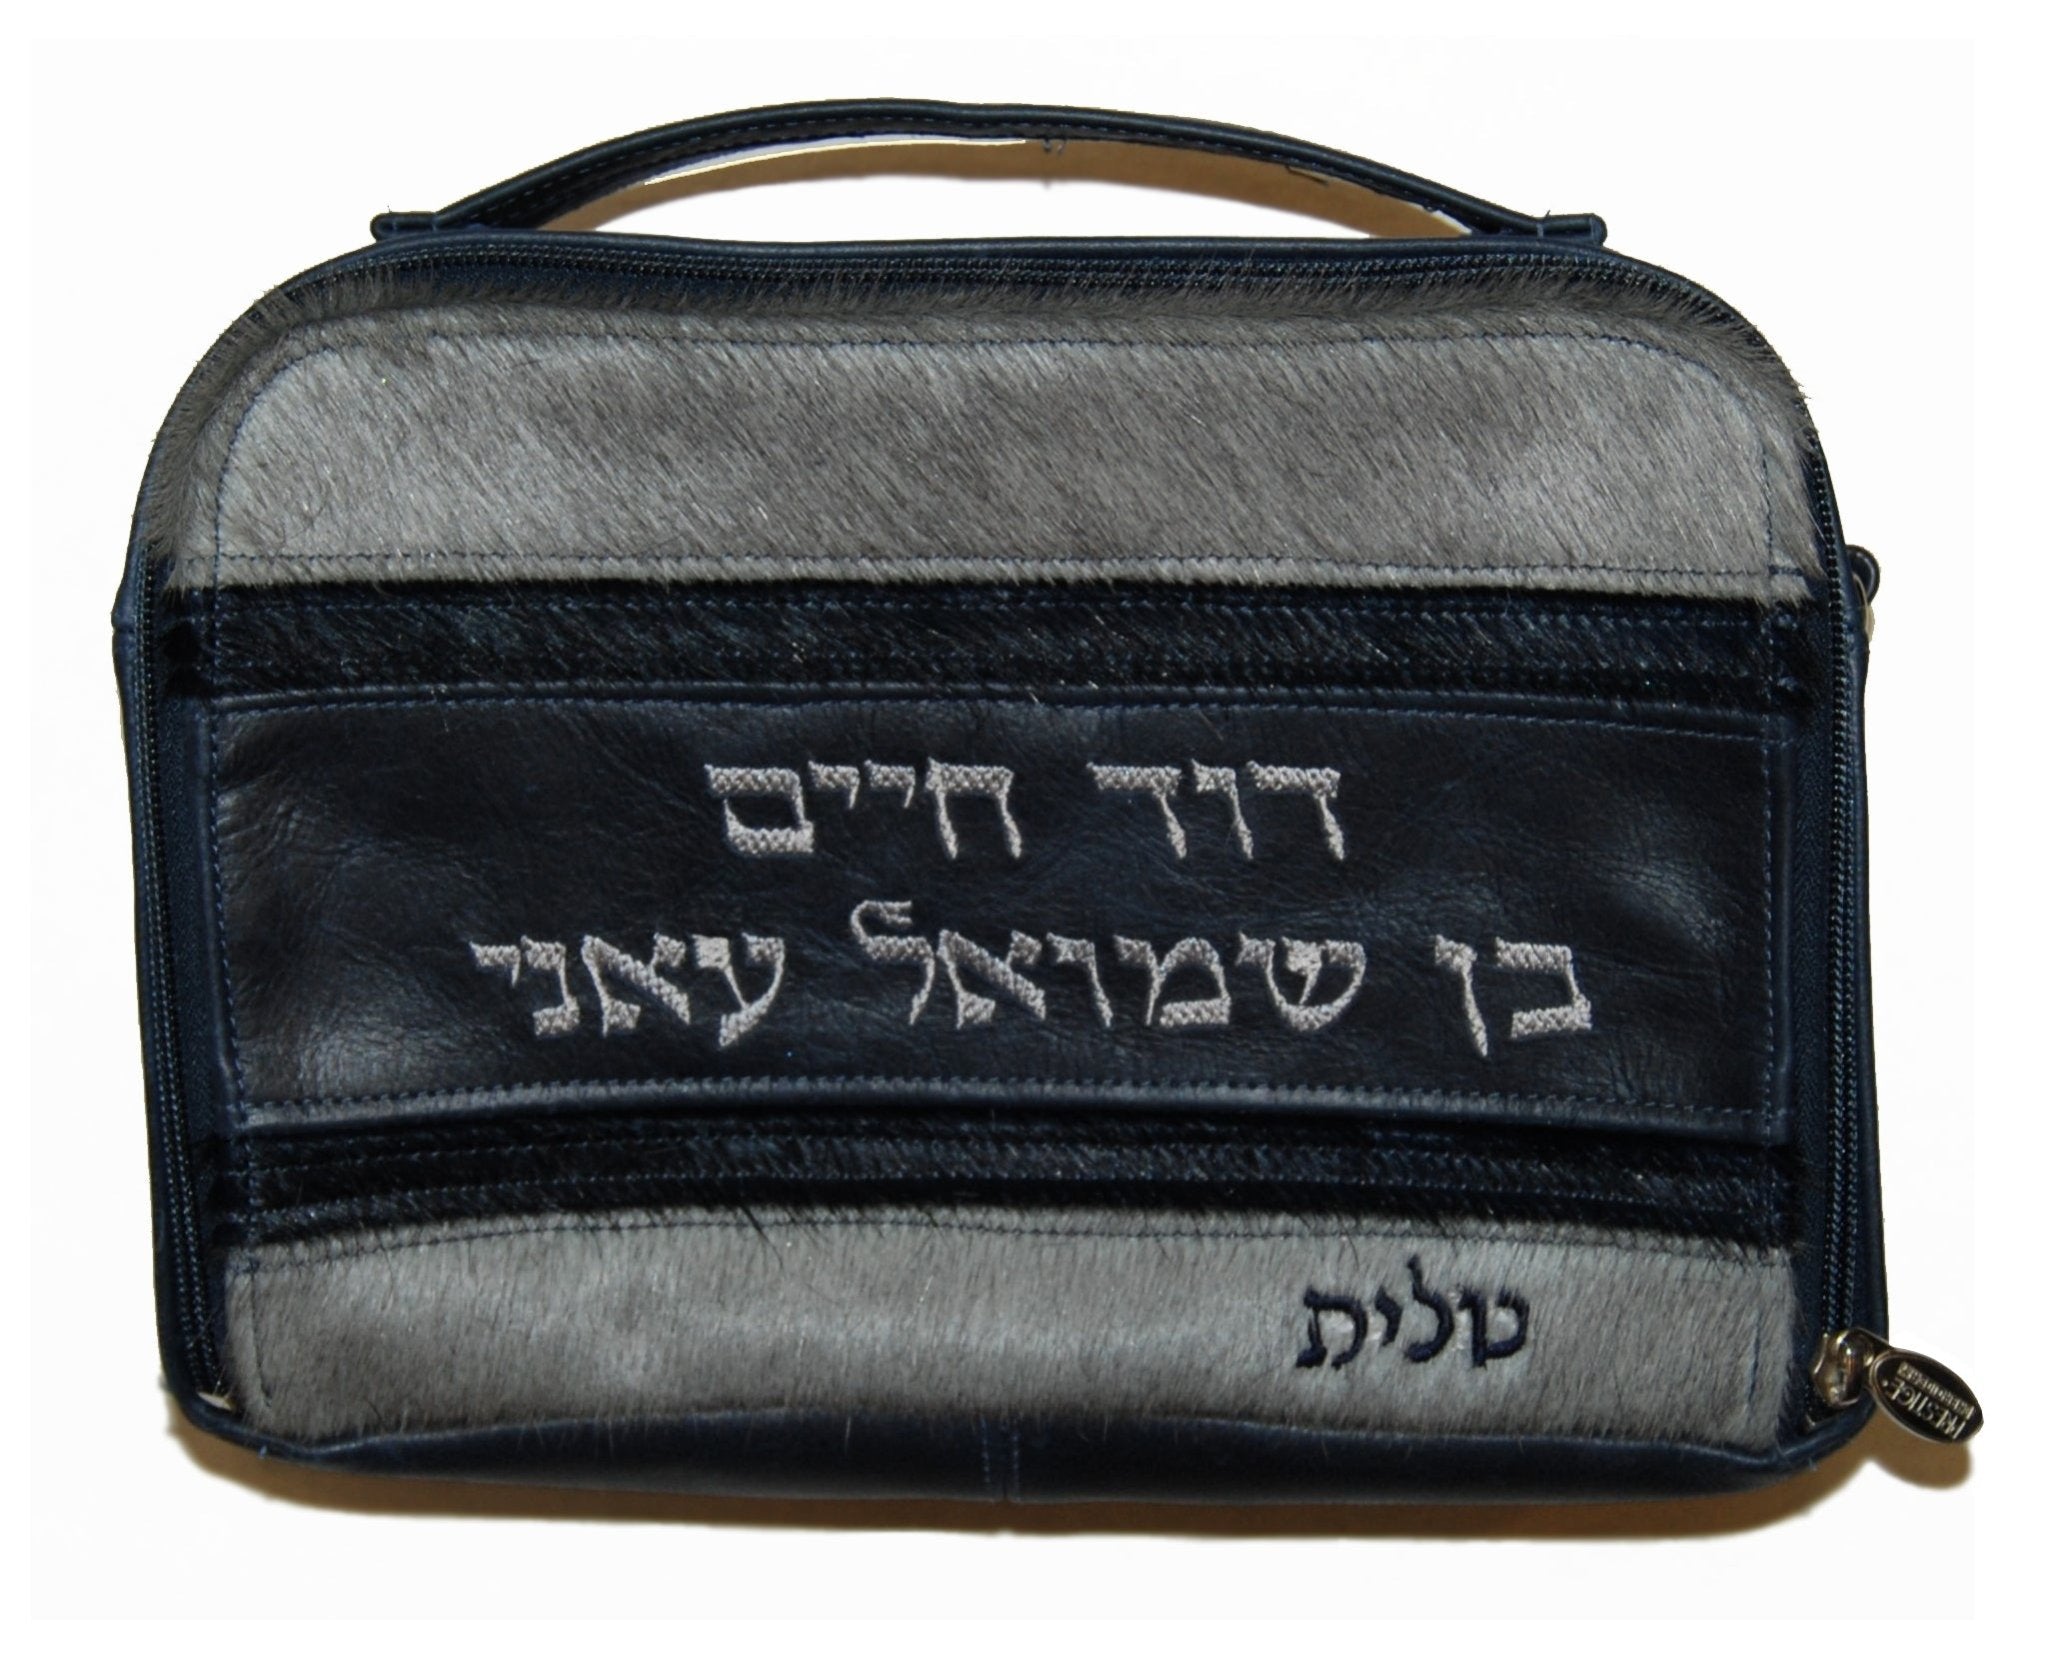 5 stripe Compact Tallis bag with carry handle - Simcha Couture